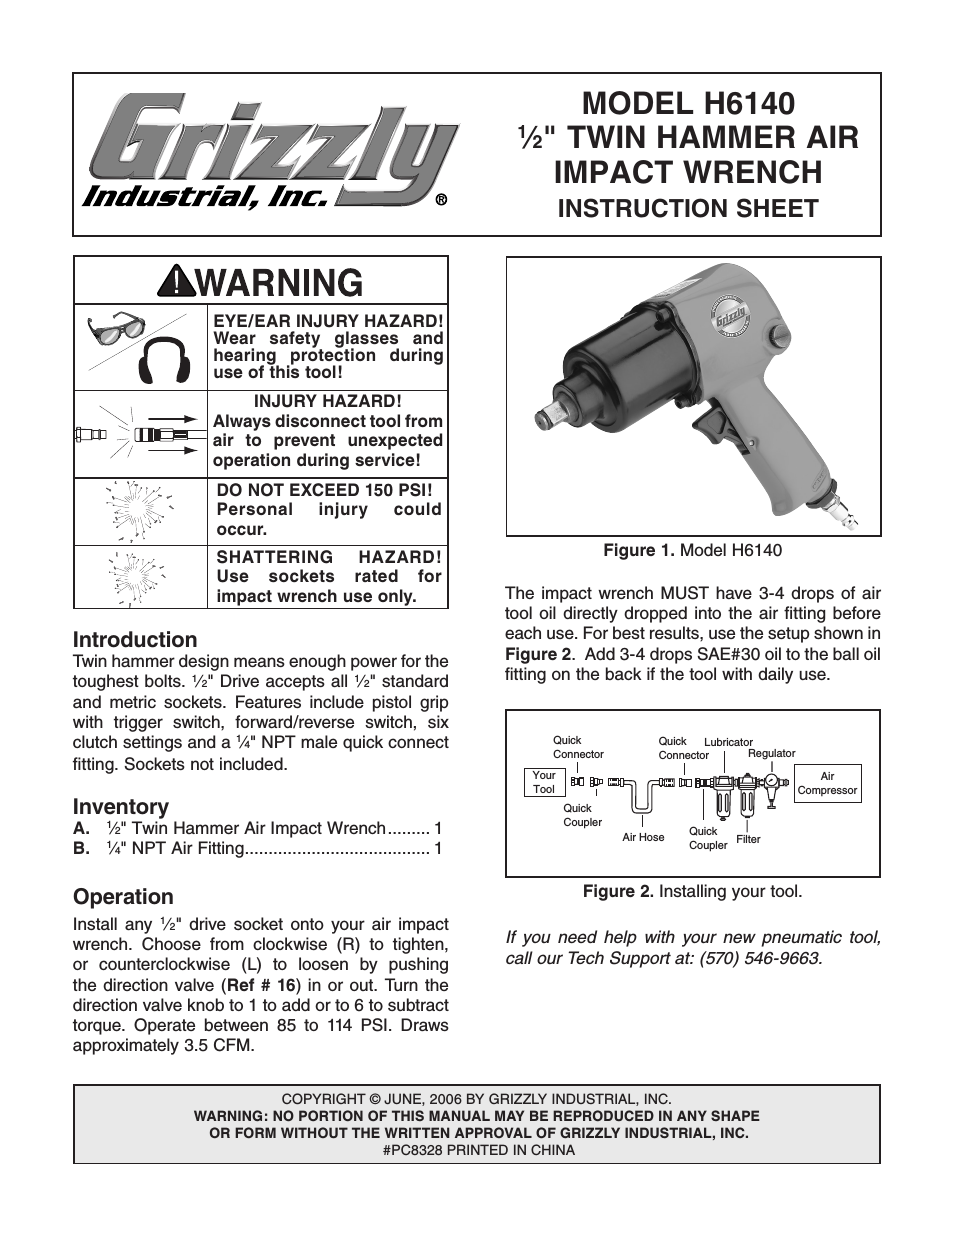 1/2" Twin Hammer Air Impact Wrench h6140 (Page 1)